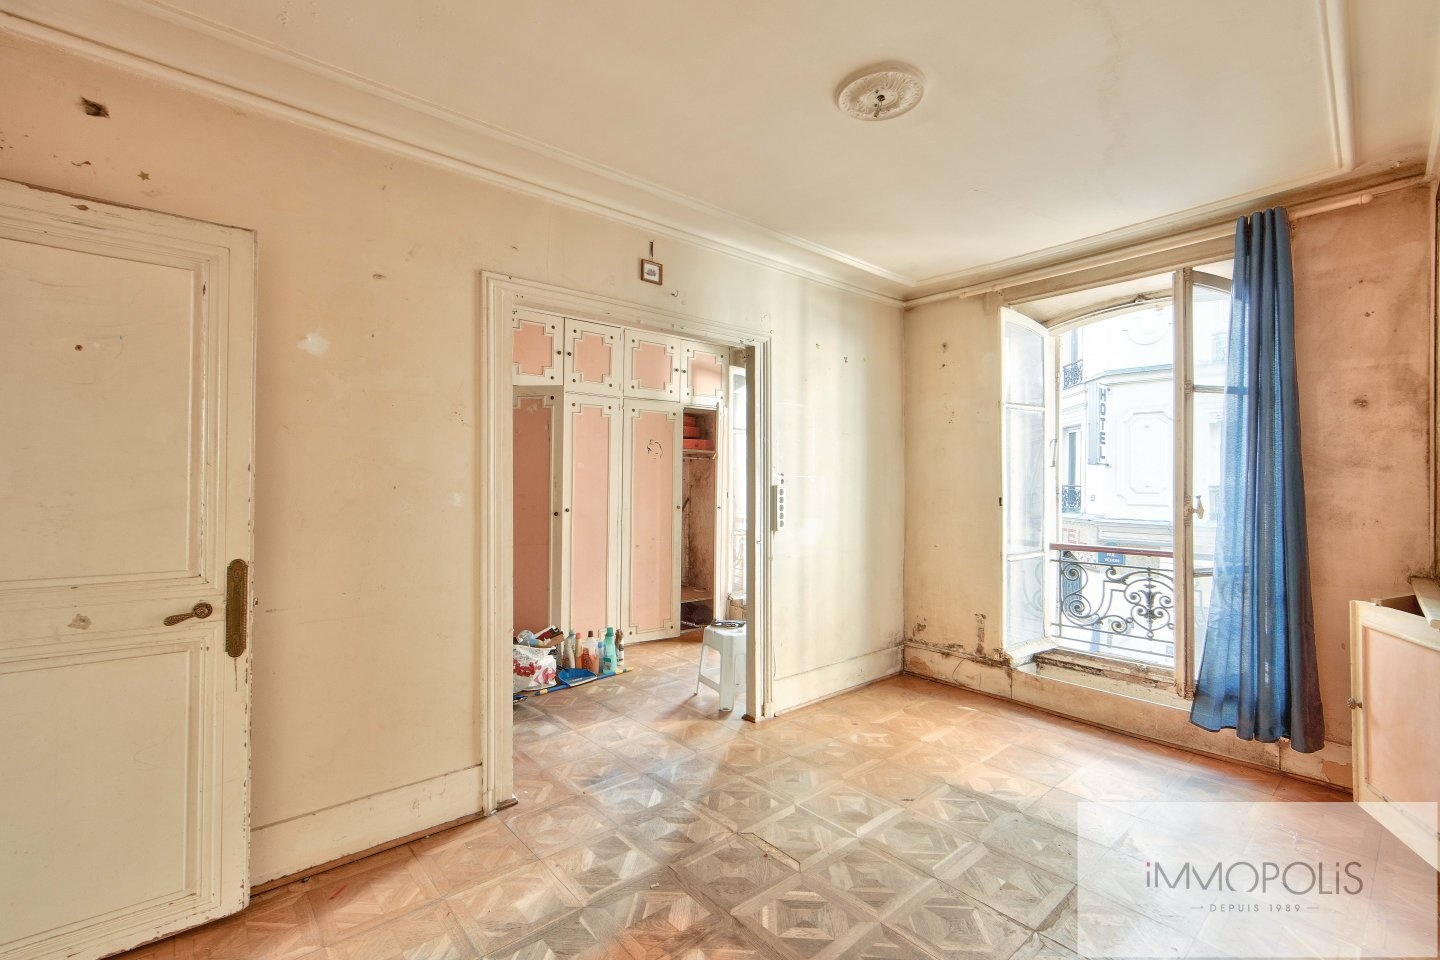 Apartment to be renovated in the heart of the abbesses. 8